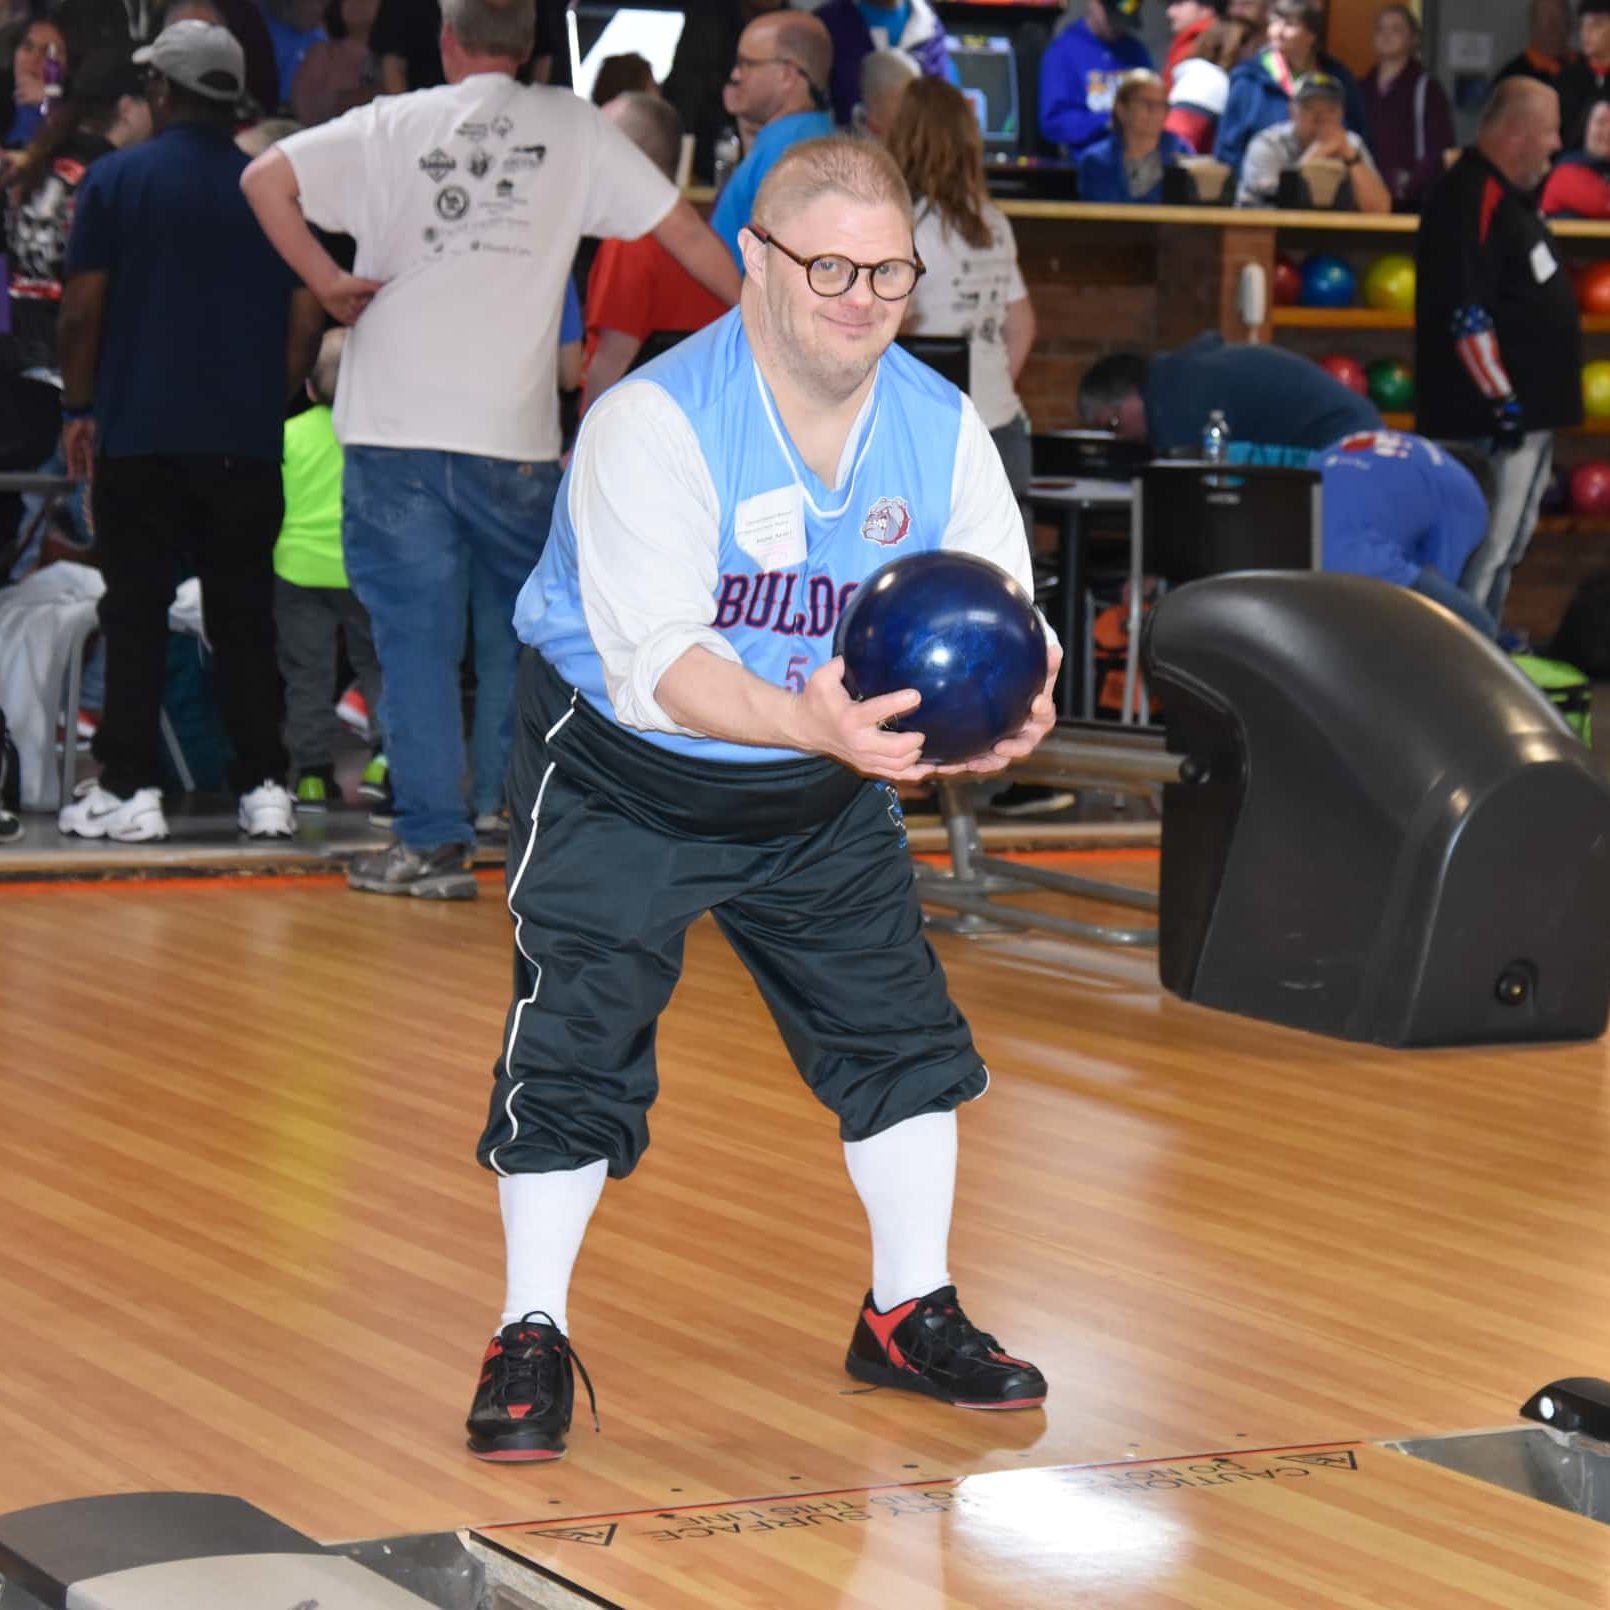 State Indoor Games Bowling 6